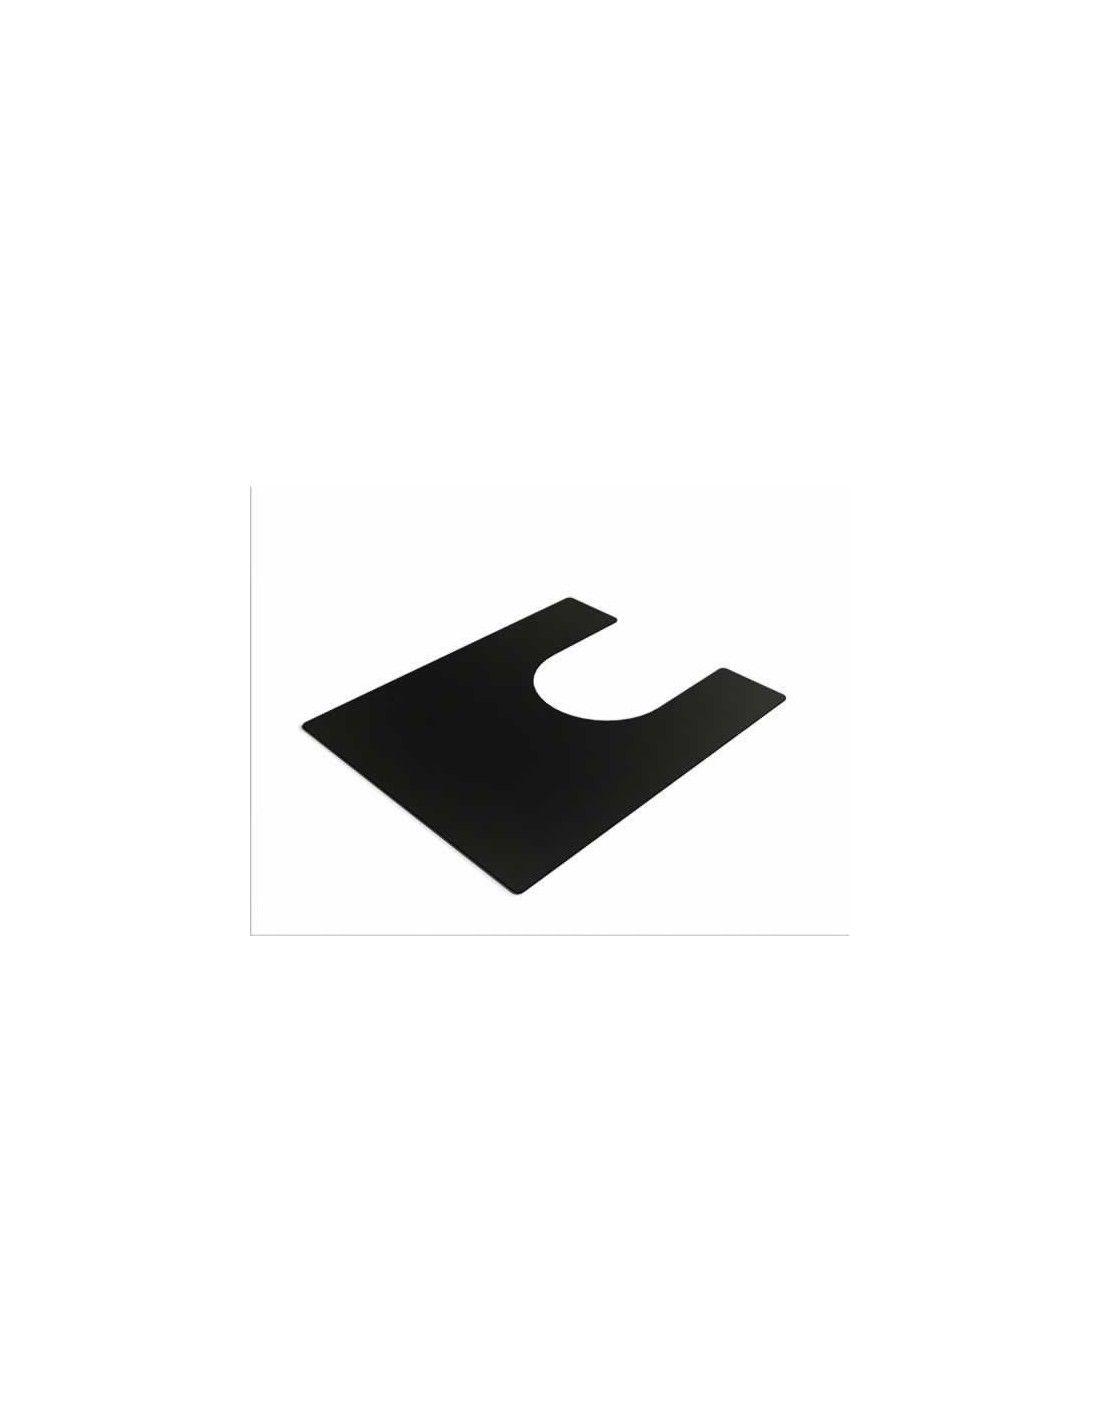 Rectangular Black and White Logo - AX3012 Rubber Sink Mat, Protect Your Sink Base From Scratches Etc AX3012